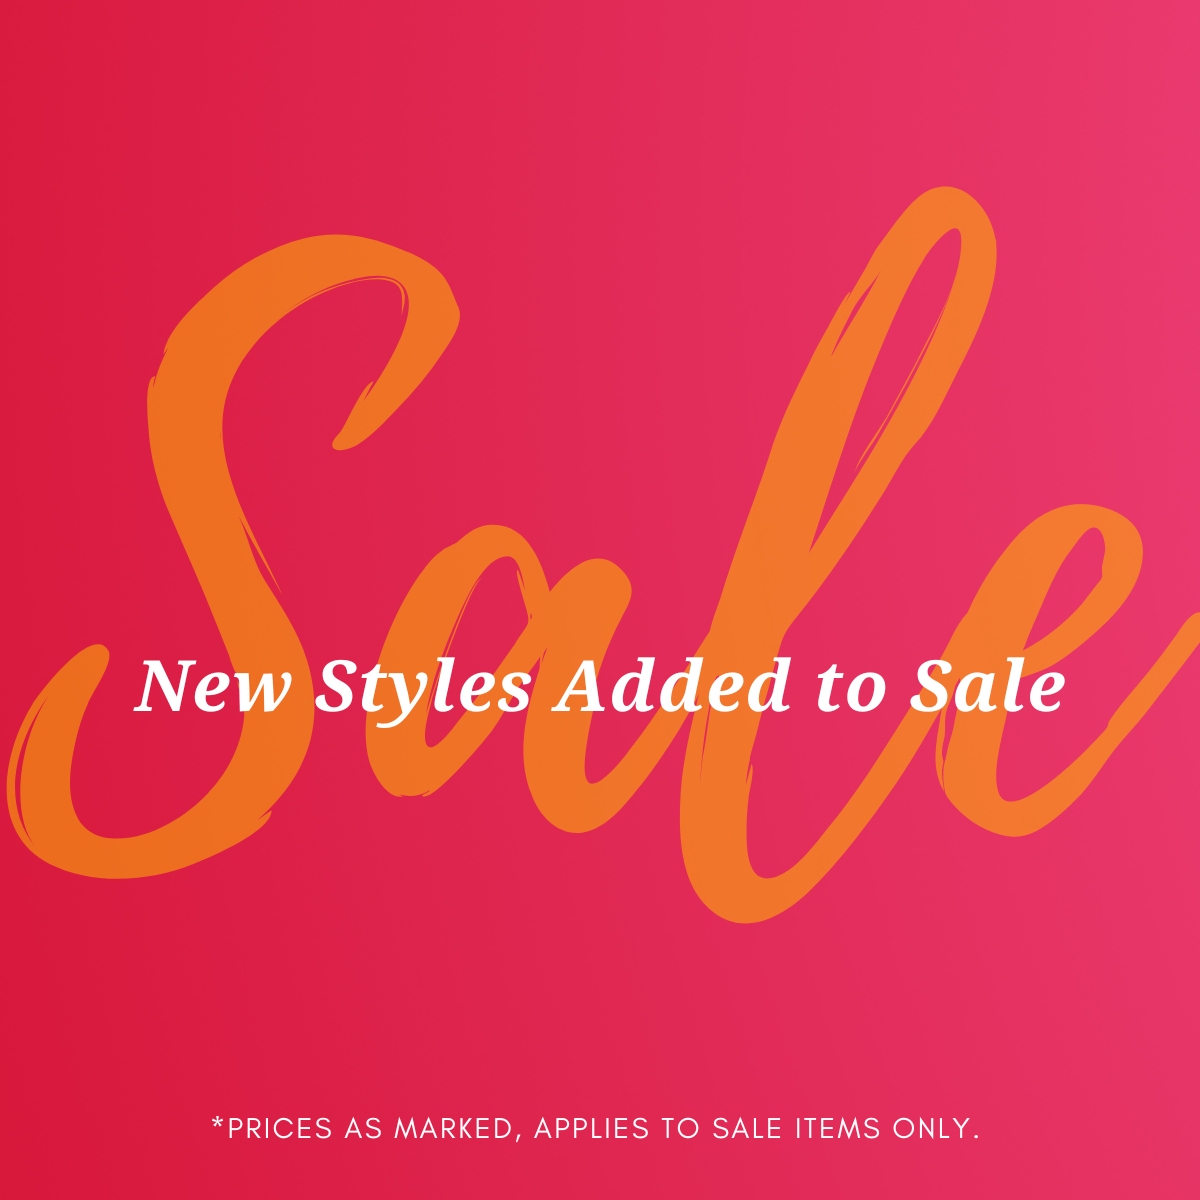 New Styles Added To Sale